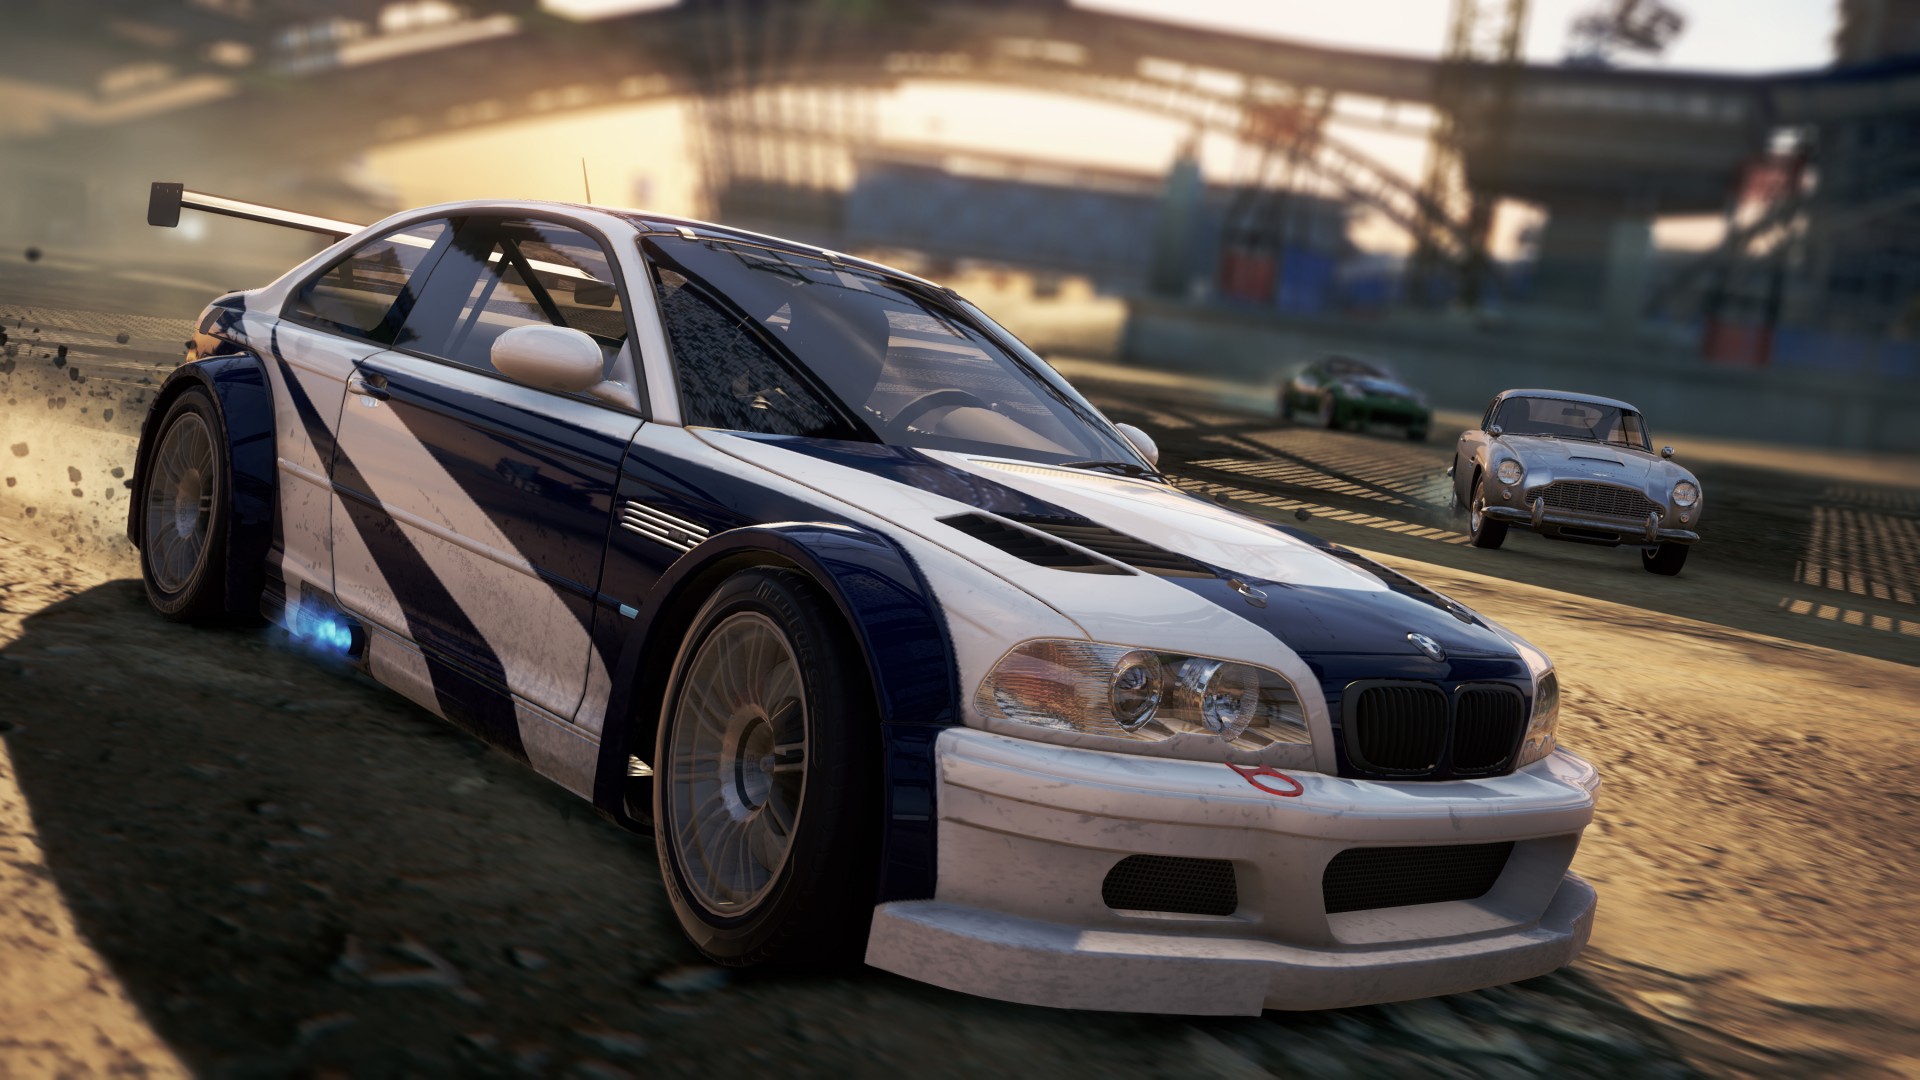 Need for speed world bmw m3 gtr most wanted #7